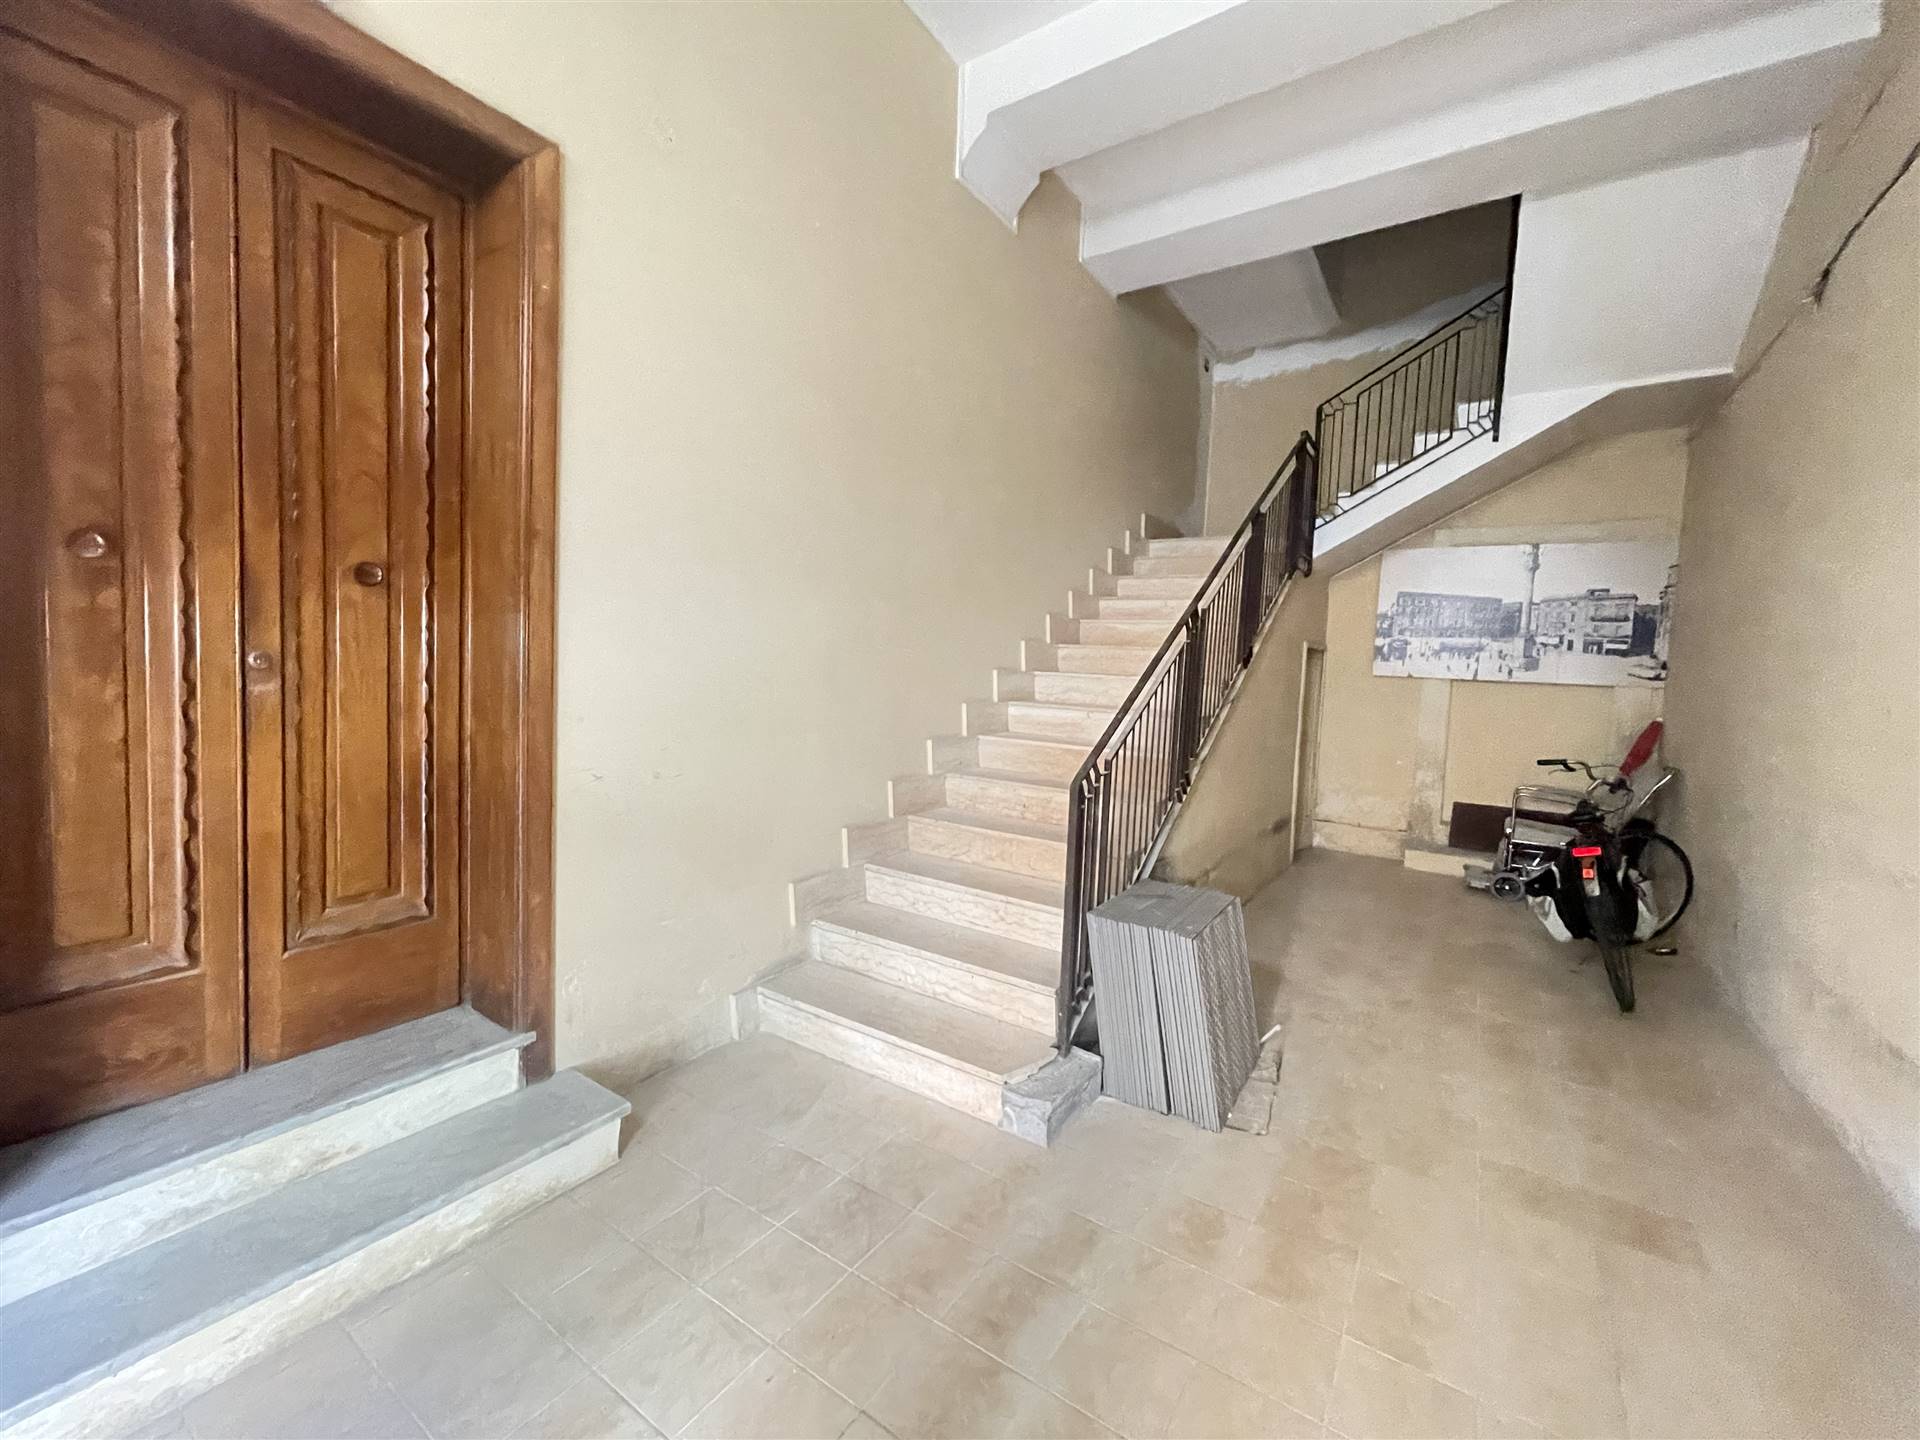 SAN LAZZARO, LECCE, Apartment for sale of 176 Sq. mt., Good condition, Heating Individual heating system, Energetic class: G, Epi: 181,34 kwh/m2 year,